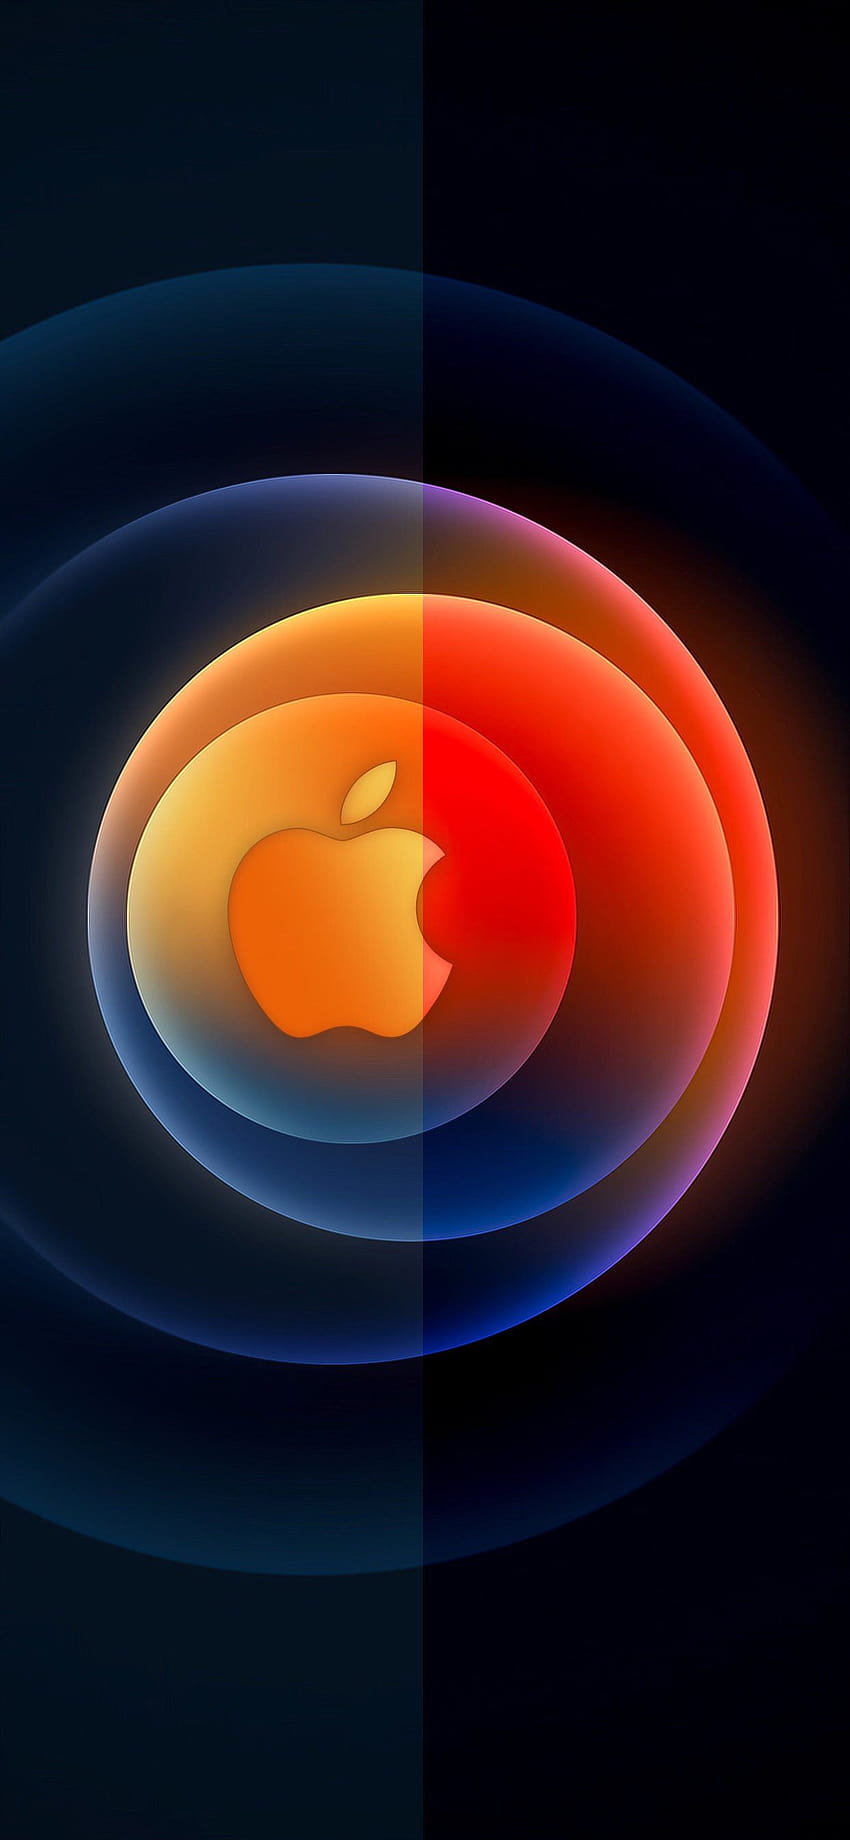 Apple Event 13 Oct DUO Logo by AR7 iPhone 11, apple logo iphone 11 pro max HD phone wallpaper